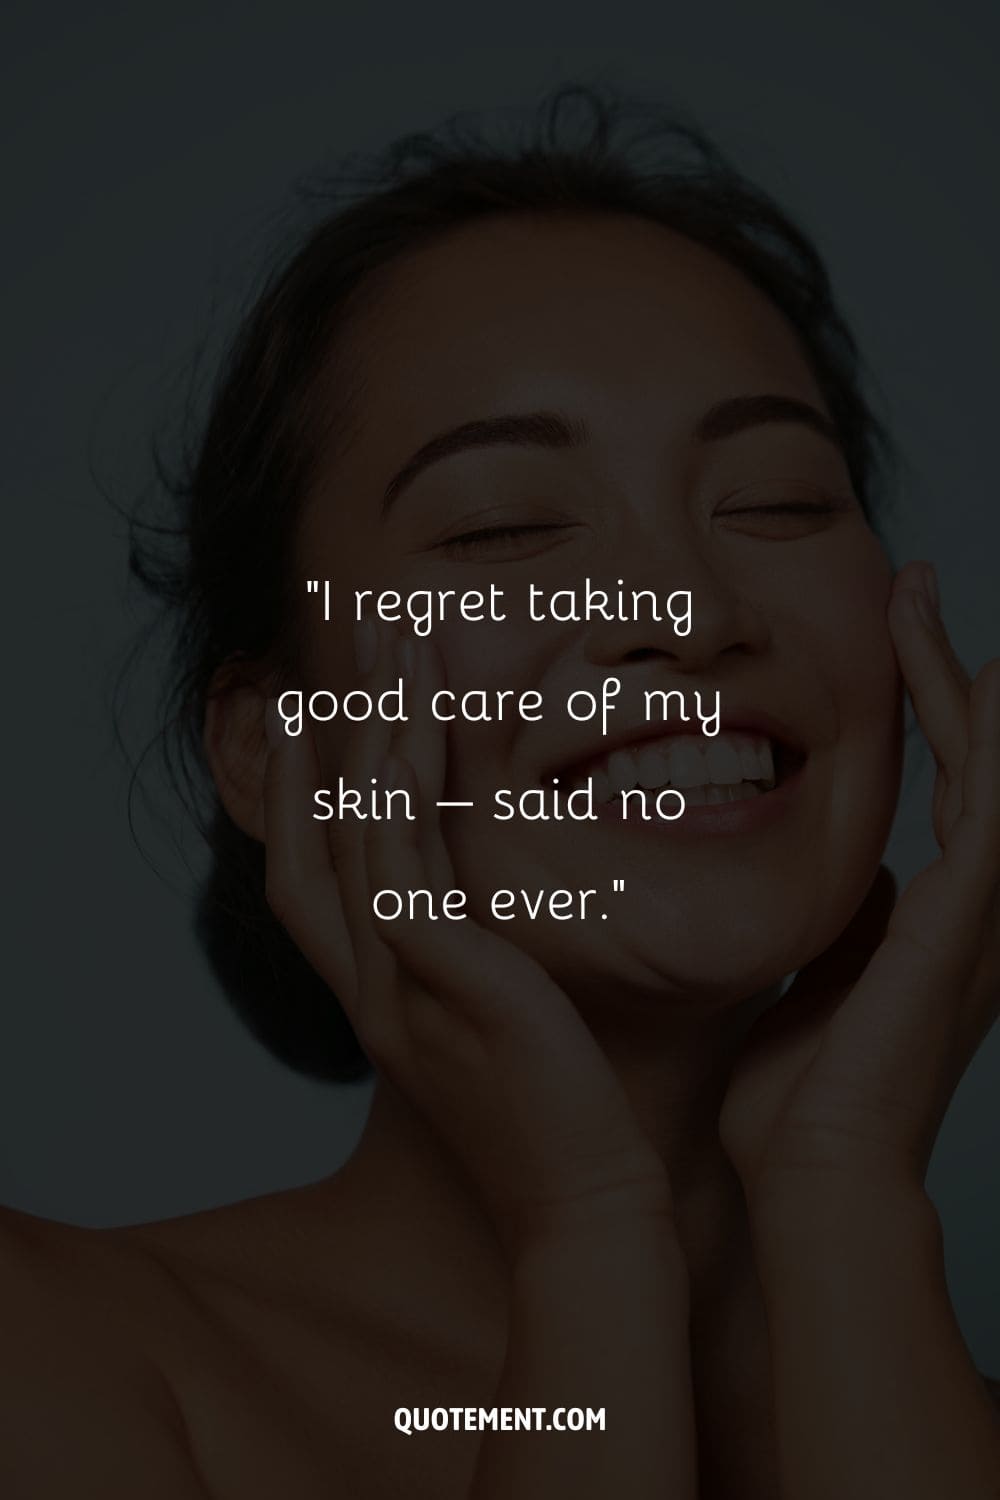 I regret taking good care of my skin – said no one ever.